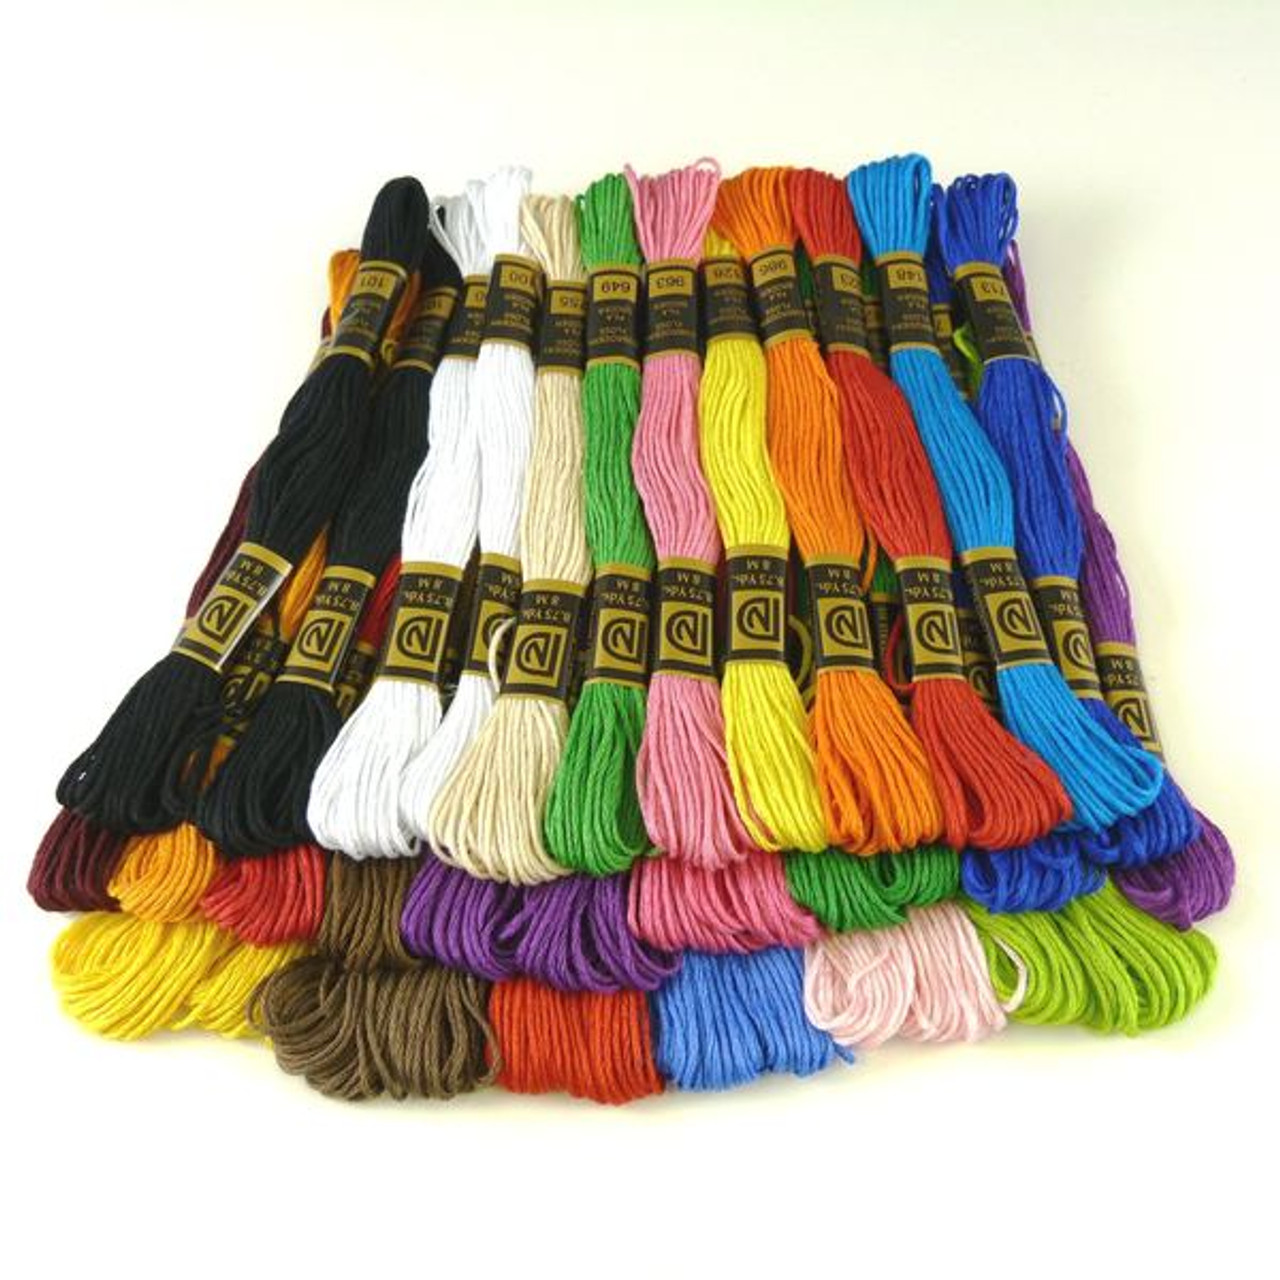 Embroidery Floss Assortment Pack - 36 skeins